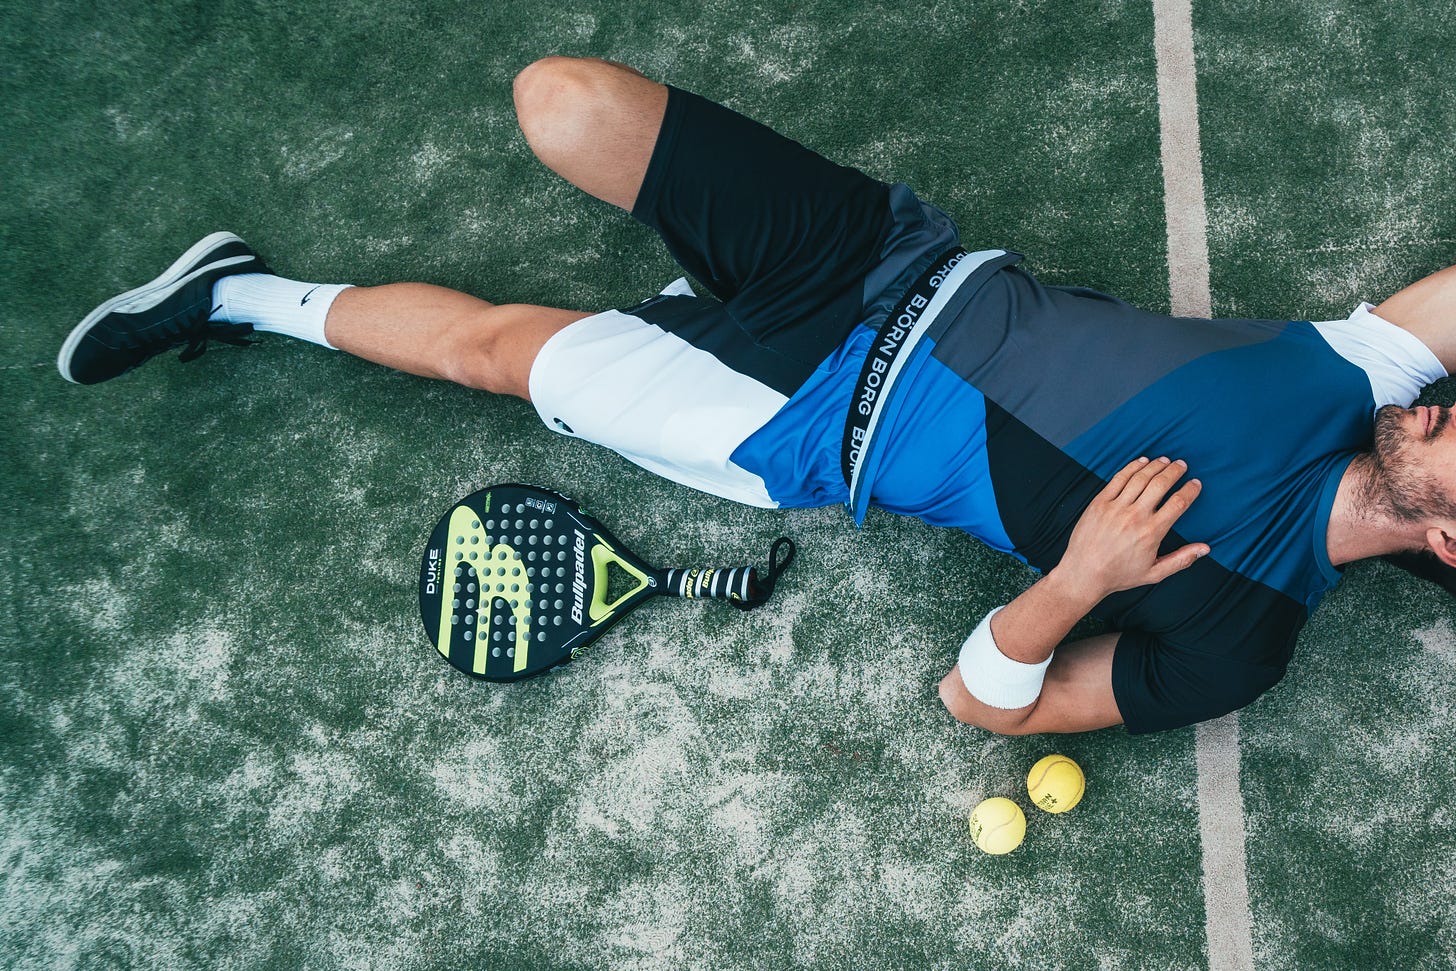 Male tennis player lying exhausted on the groud